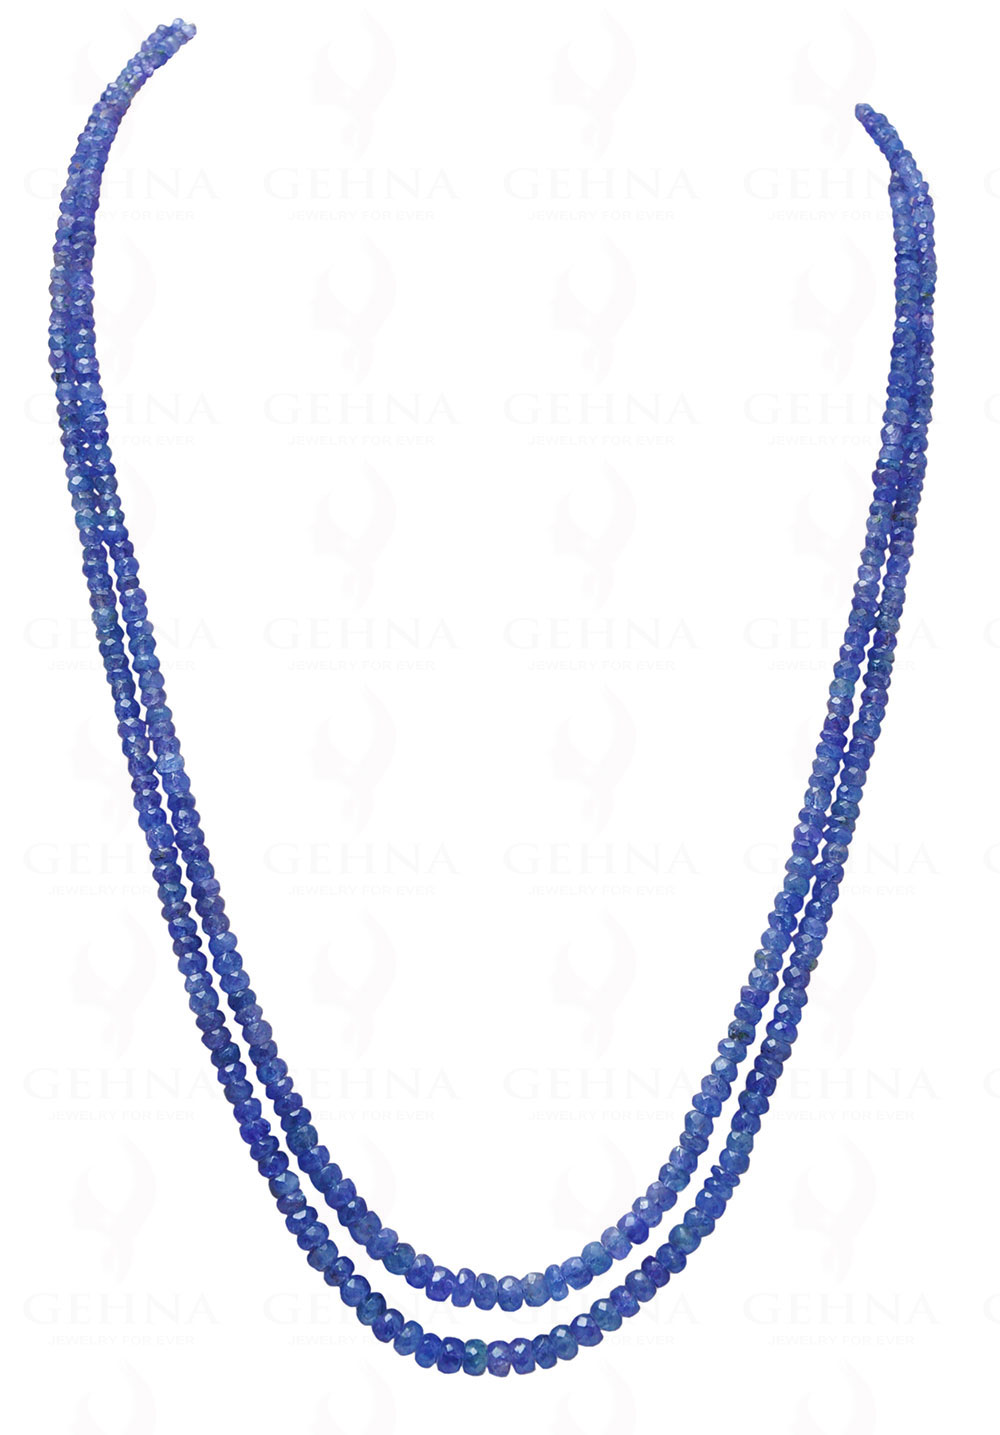 2 Rows of Tanzanite Gemstone Round Faceted Bead Necklace NS-1190